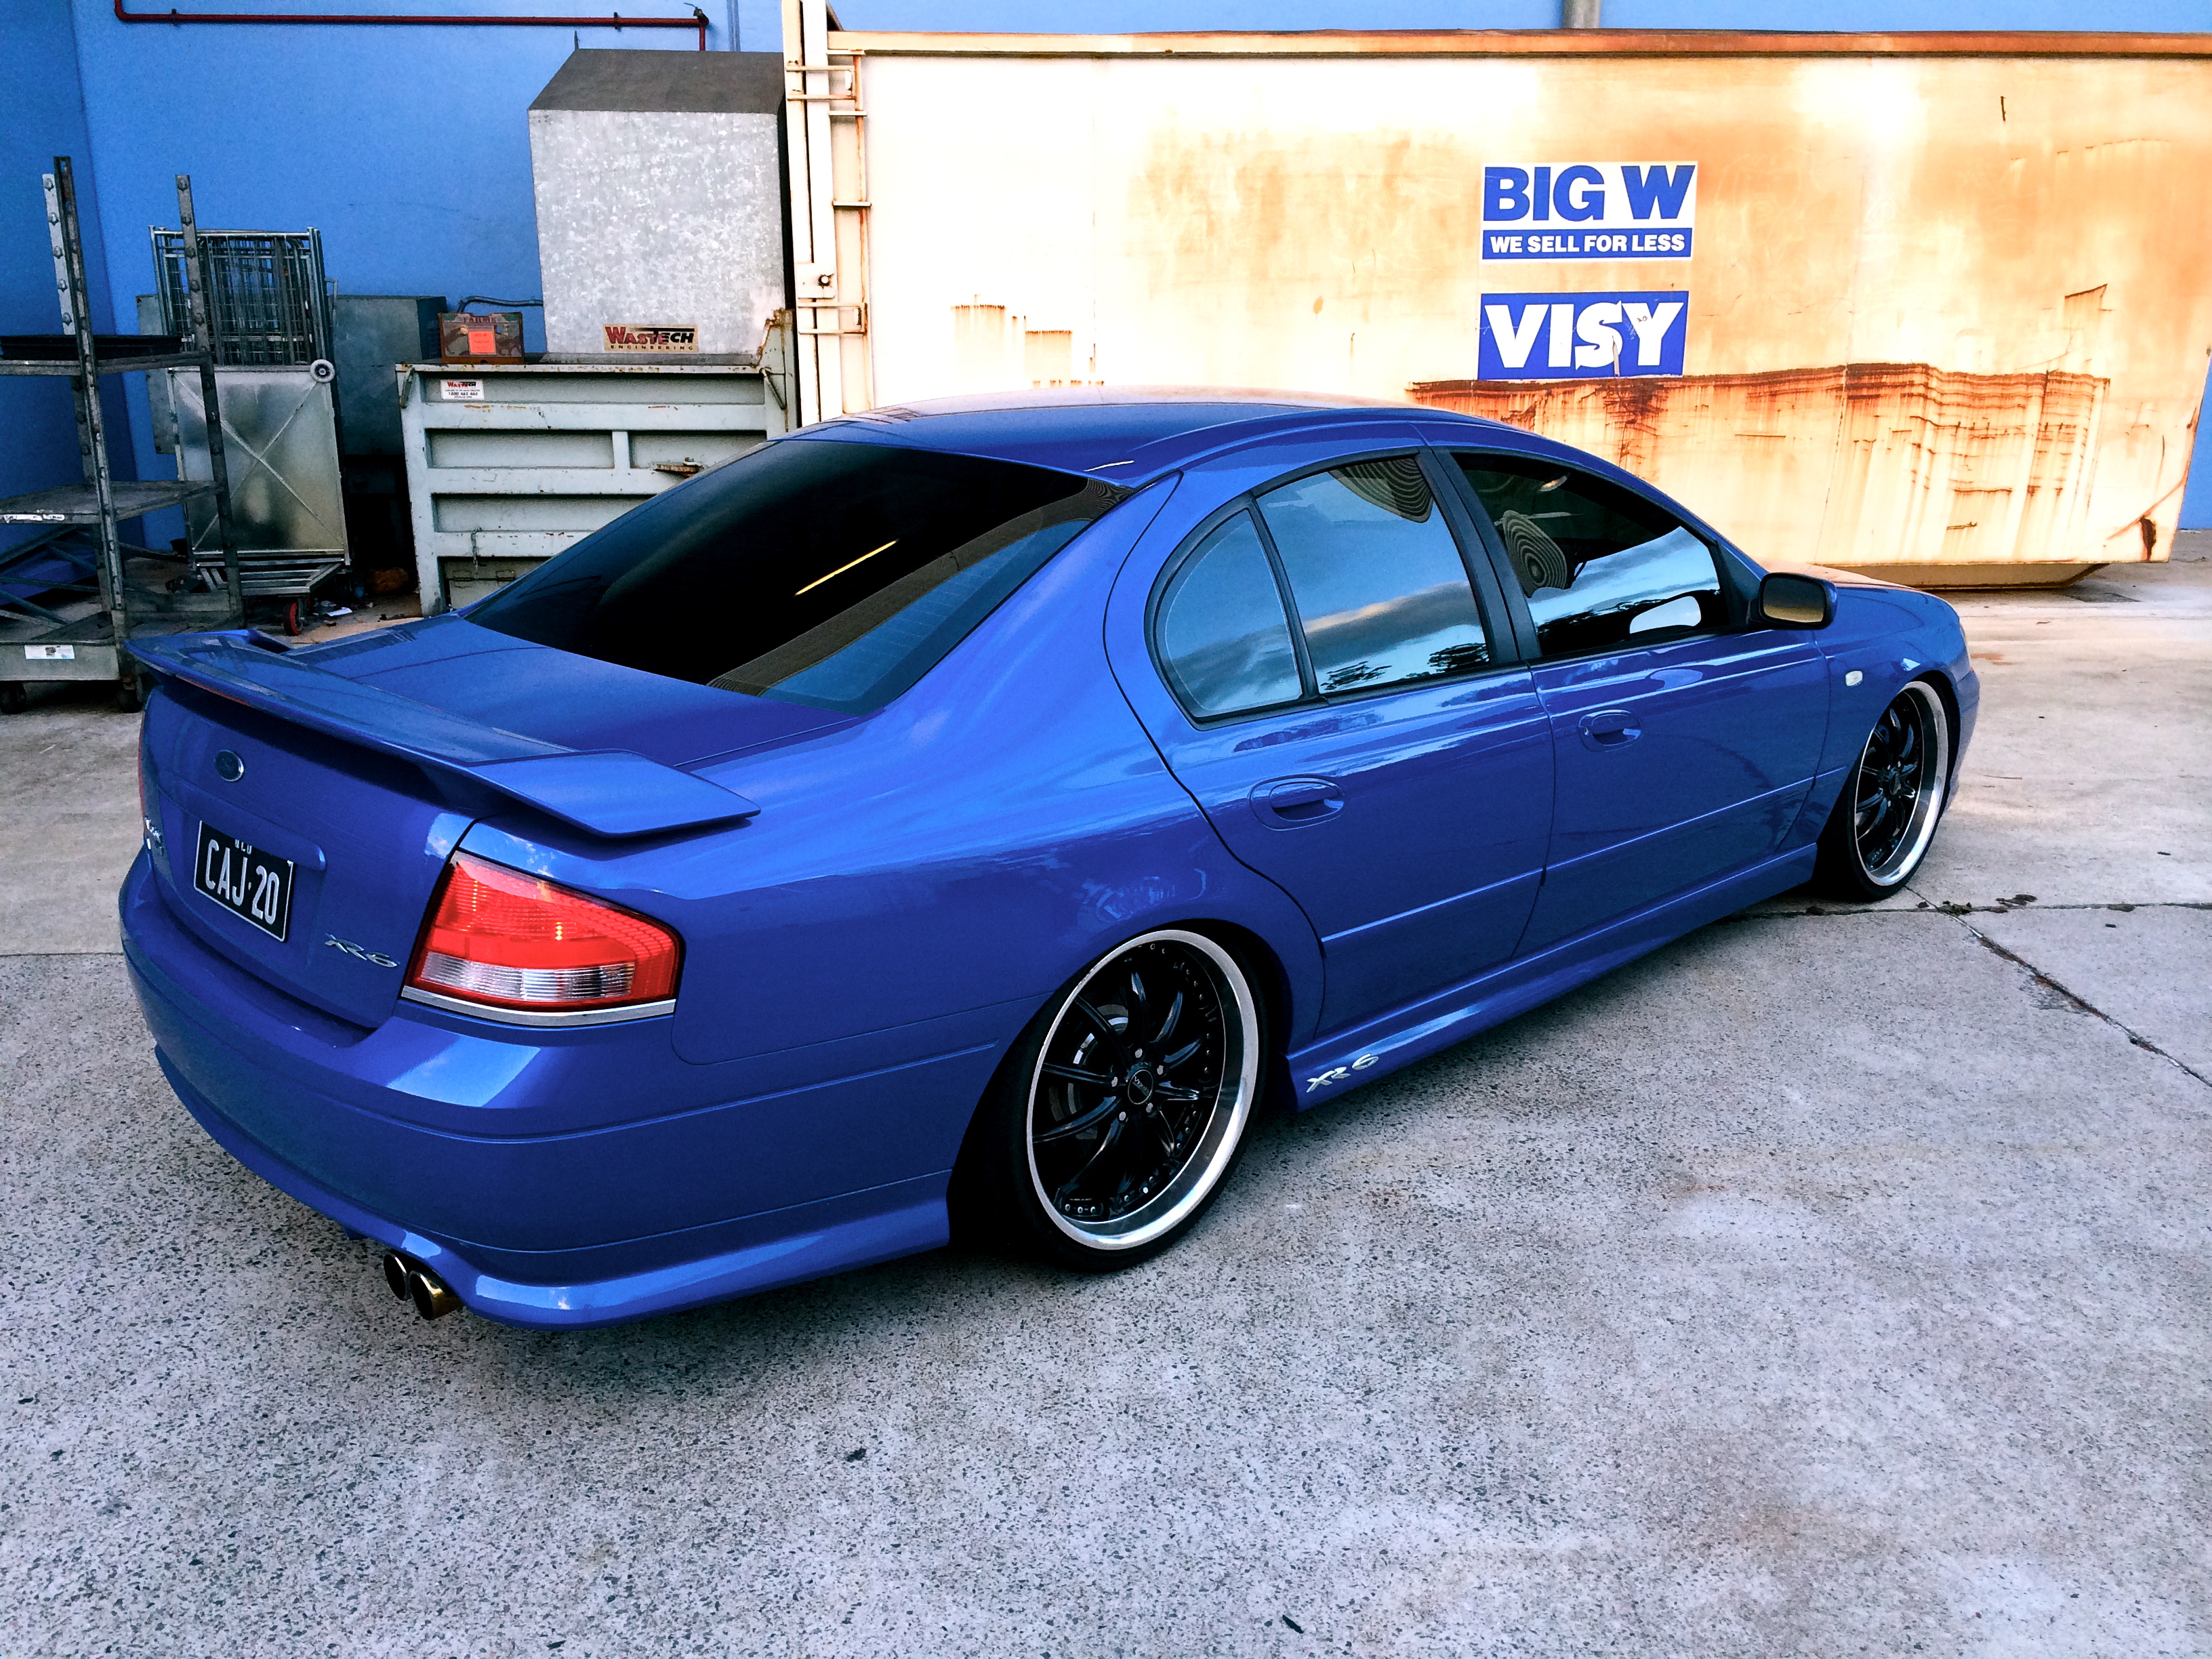 Ba Xr6 Turbo What Modifications For 400rwkw Xr6 Turbo Ford